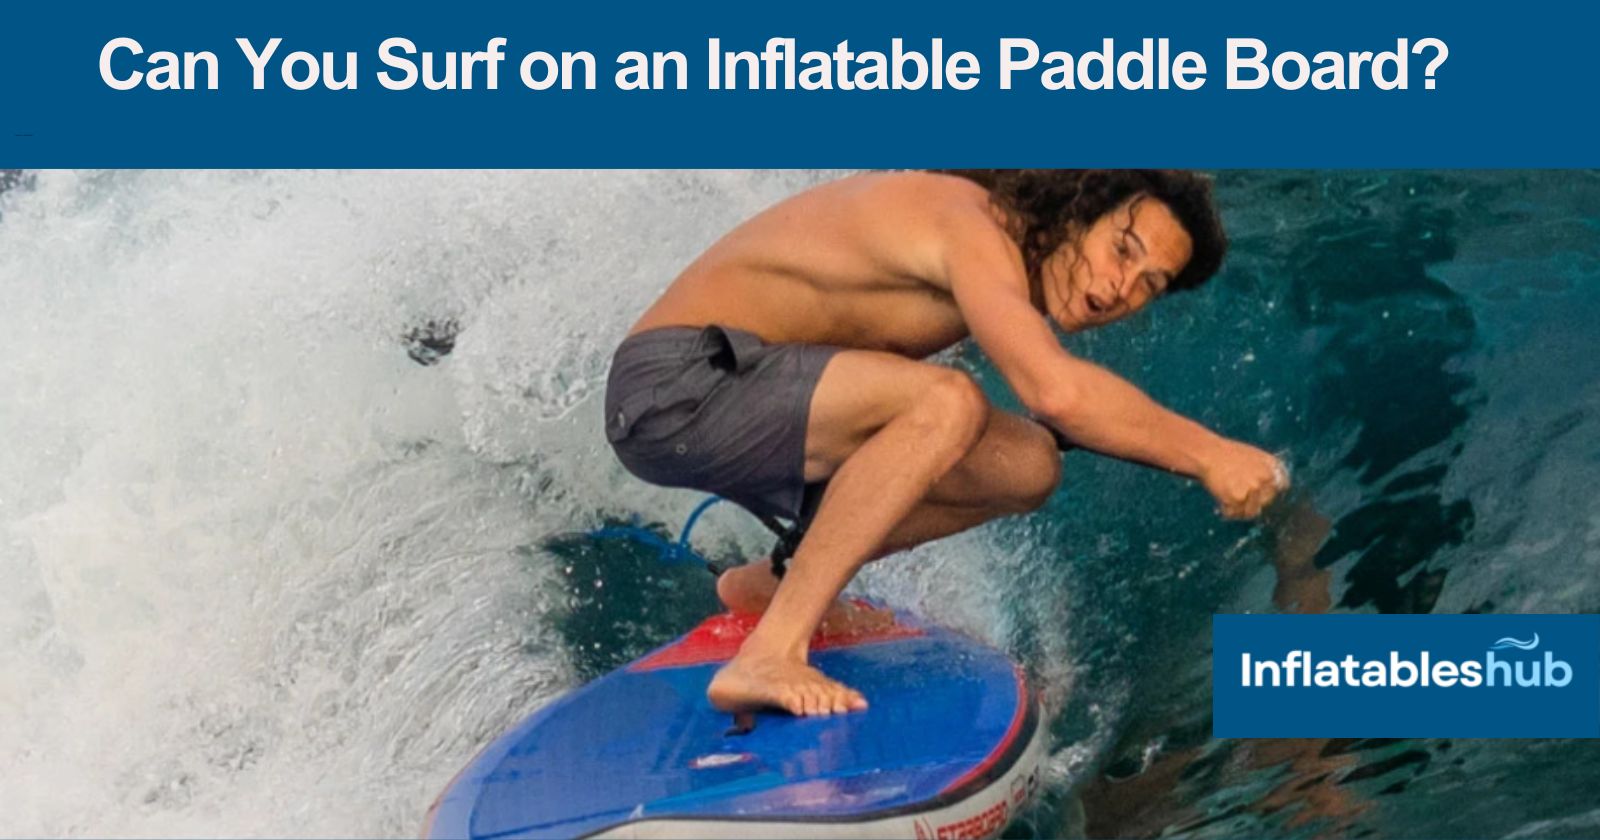 Can You Surf On an Inflatable Paddle Board